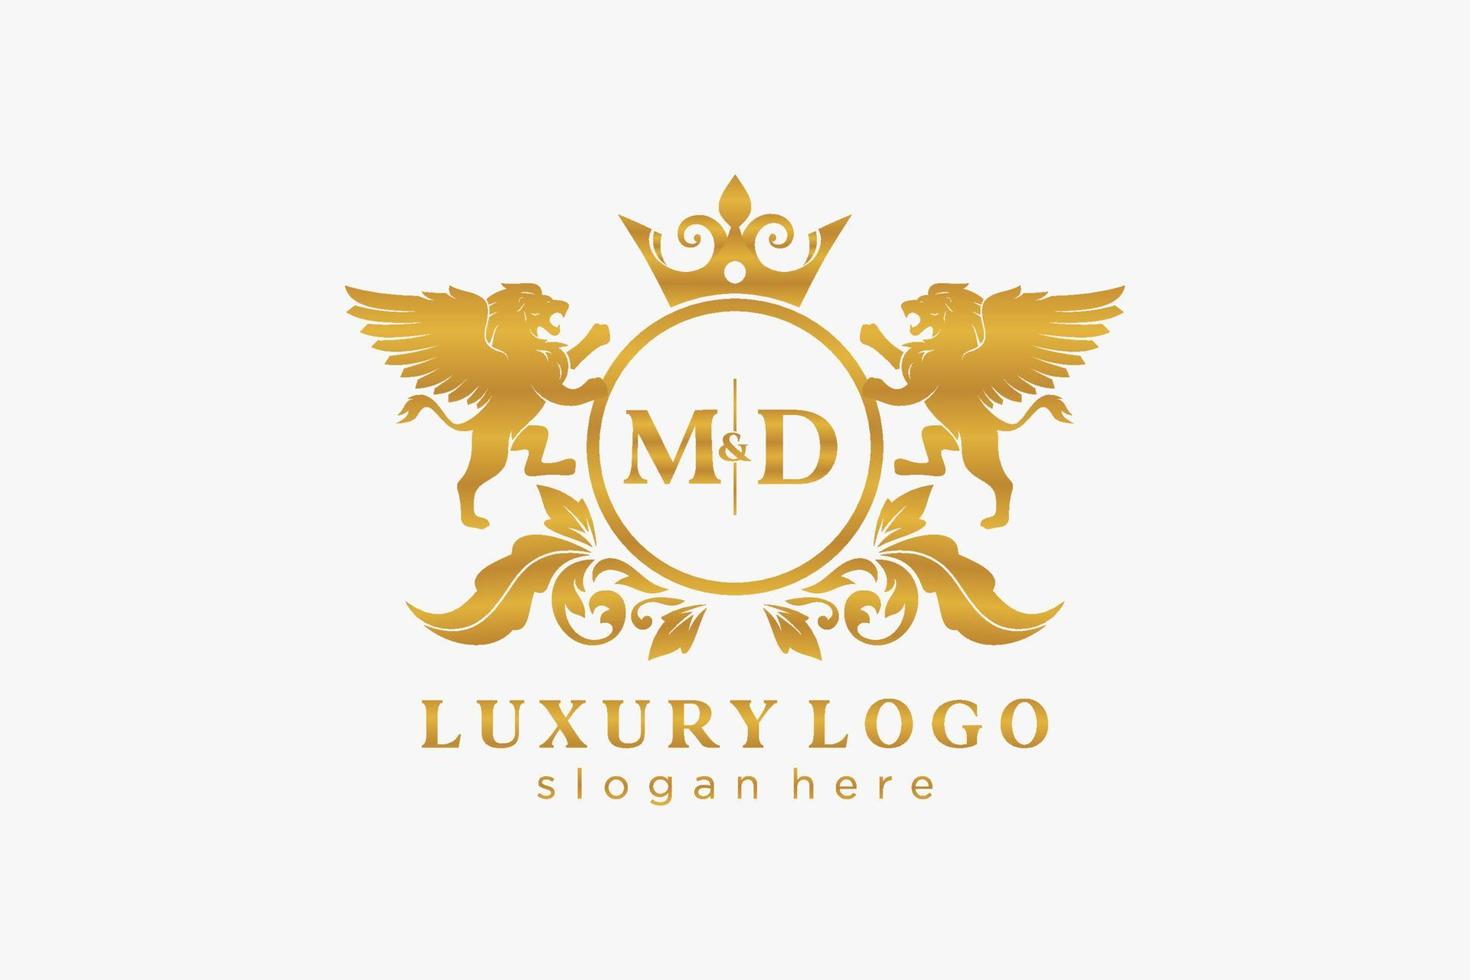 Initial MD Letter Lion Royal Luxury Logo template in vector art for Restaurant, Royalty, Boutique, Cafe, Hotel, Heraldic, Jewelry, Fashion and other vector illustration.